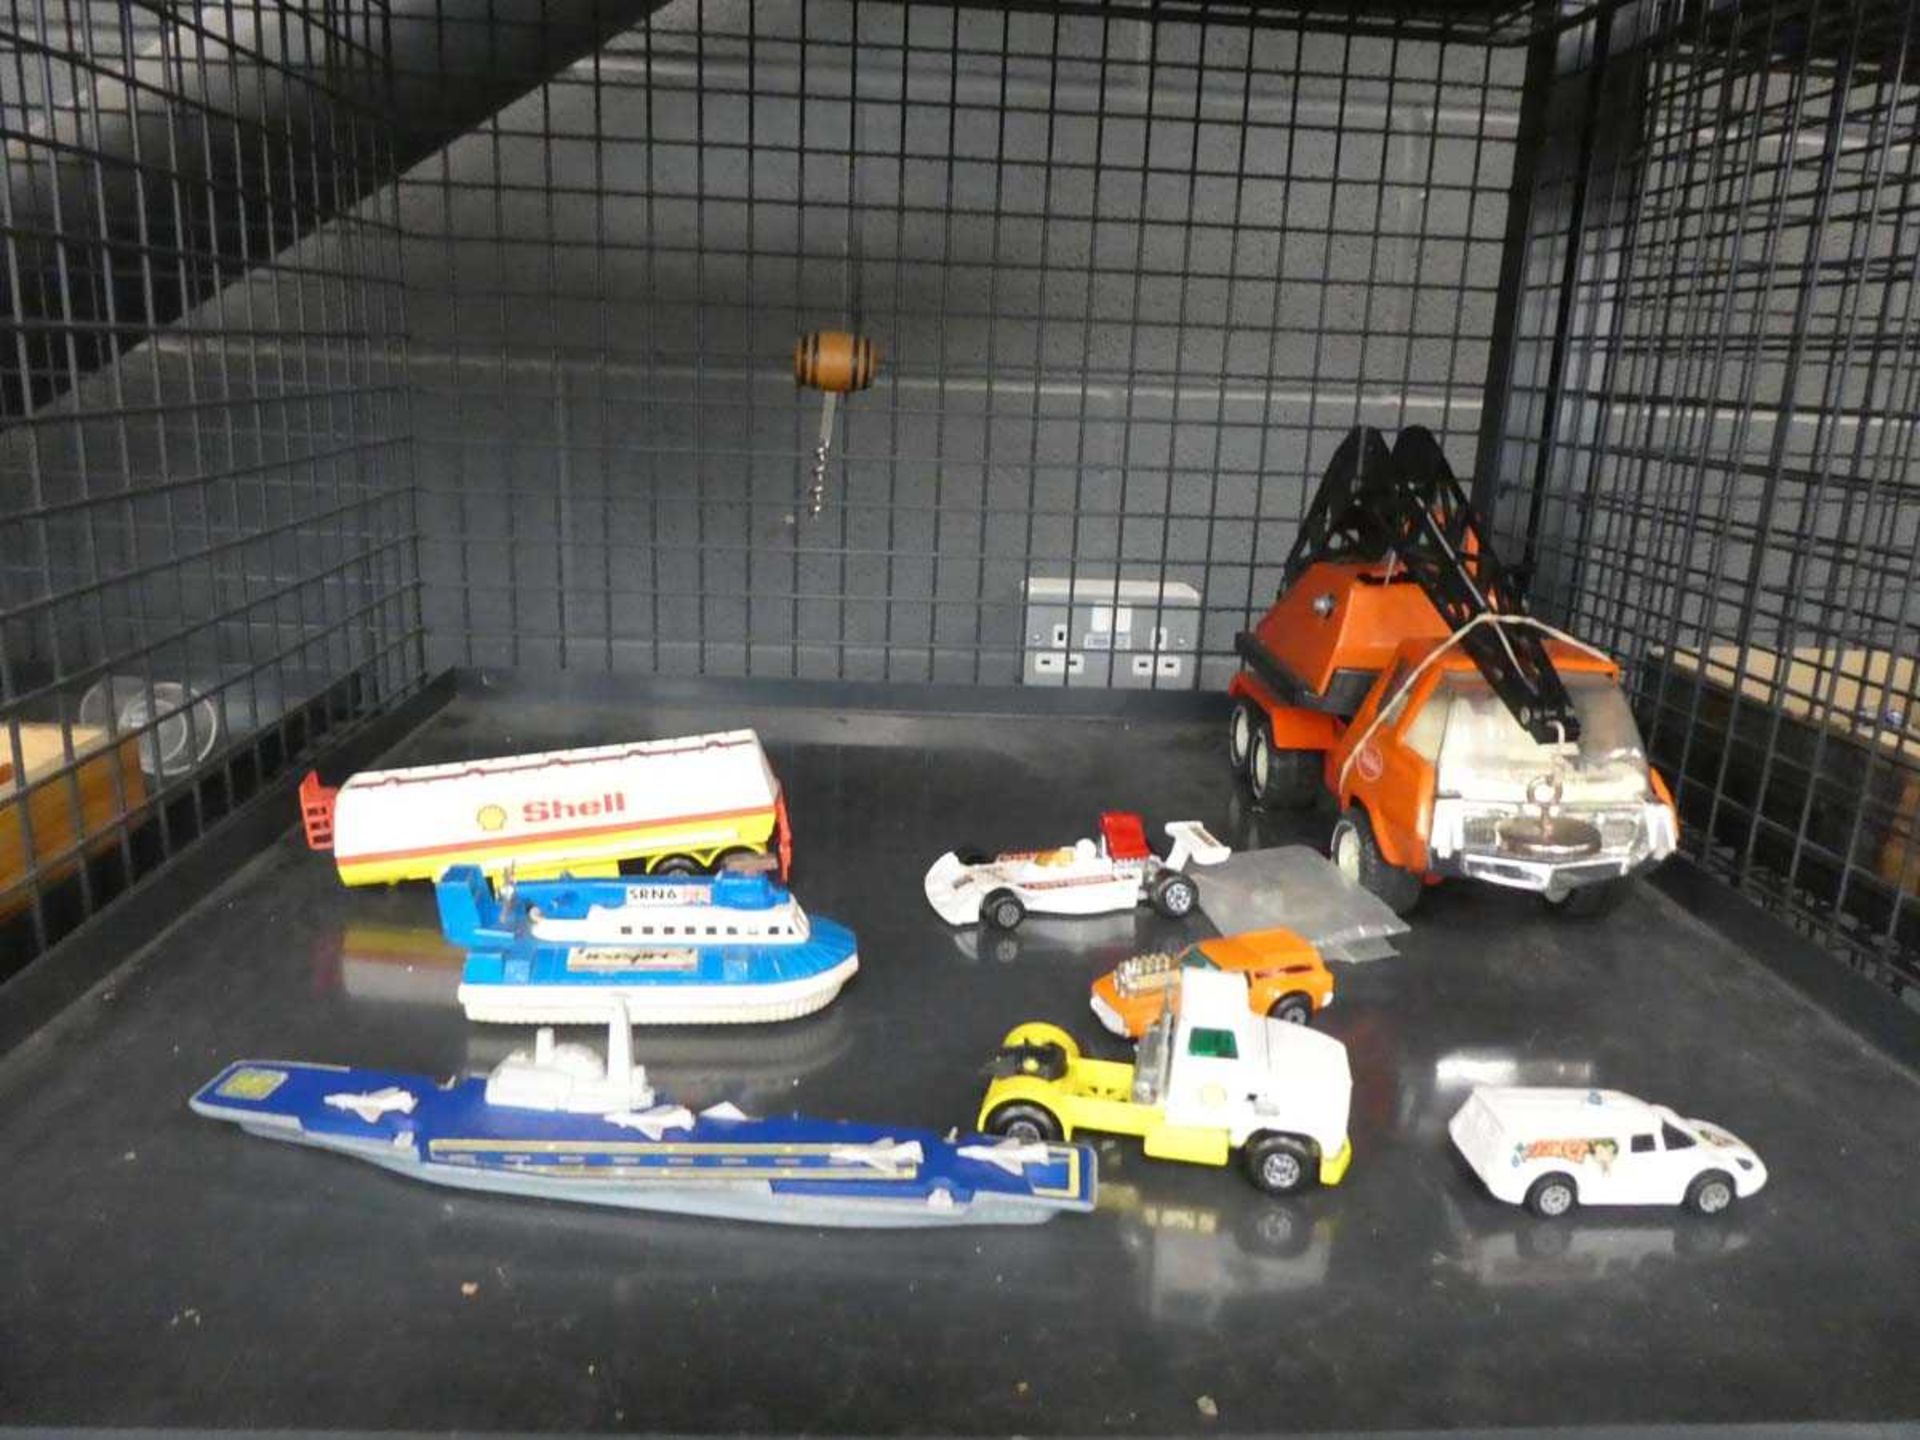 Cage containing Tonka toy and diecast cars and ships